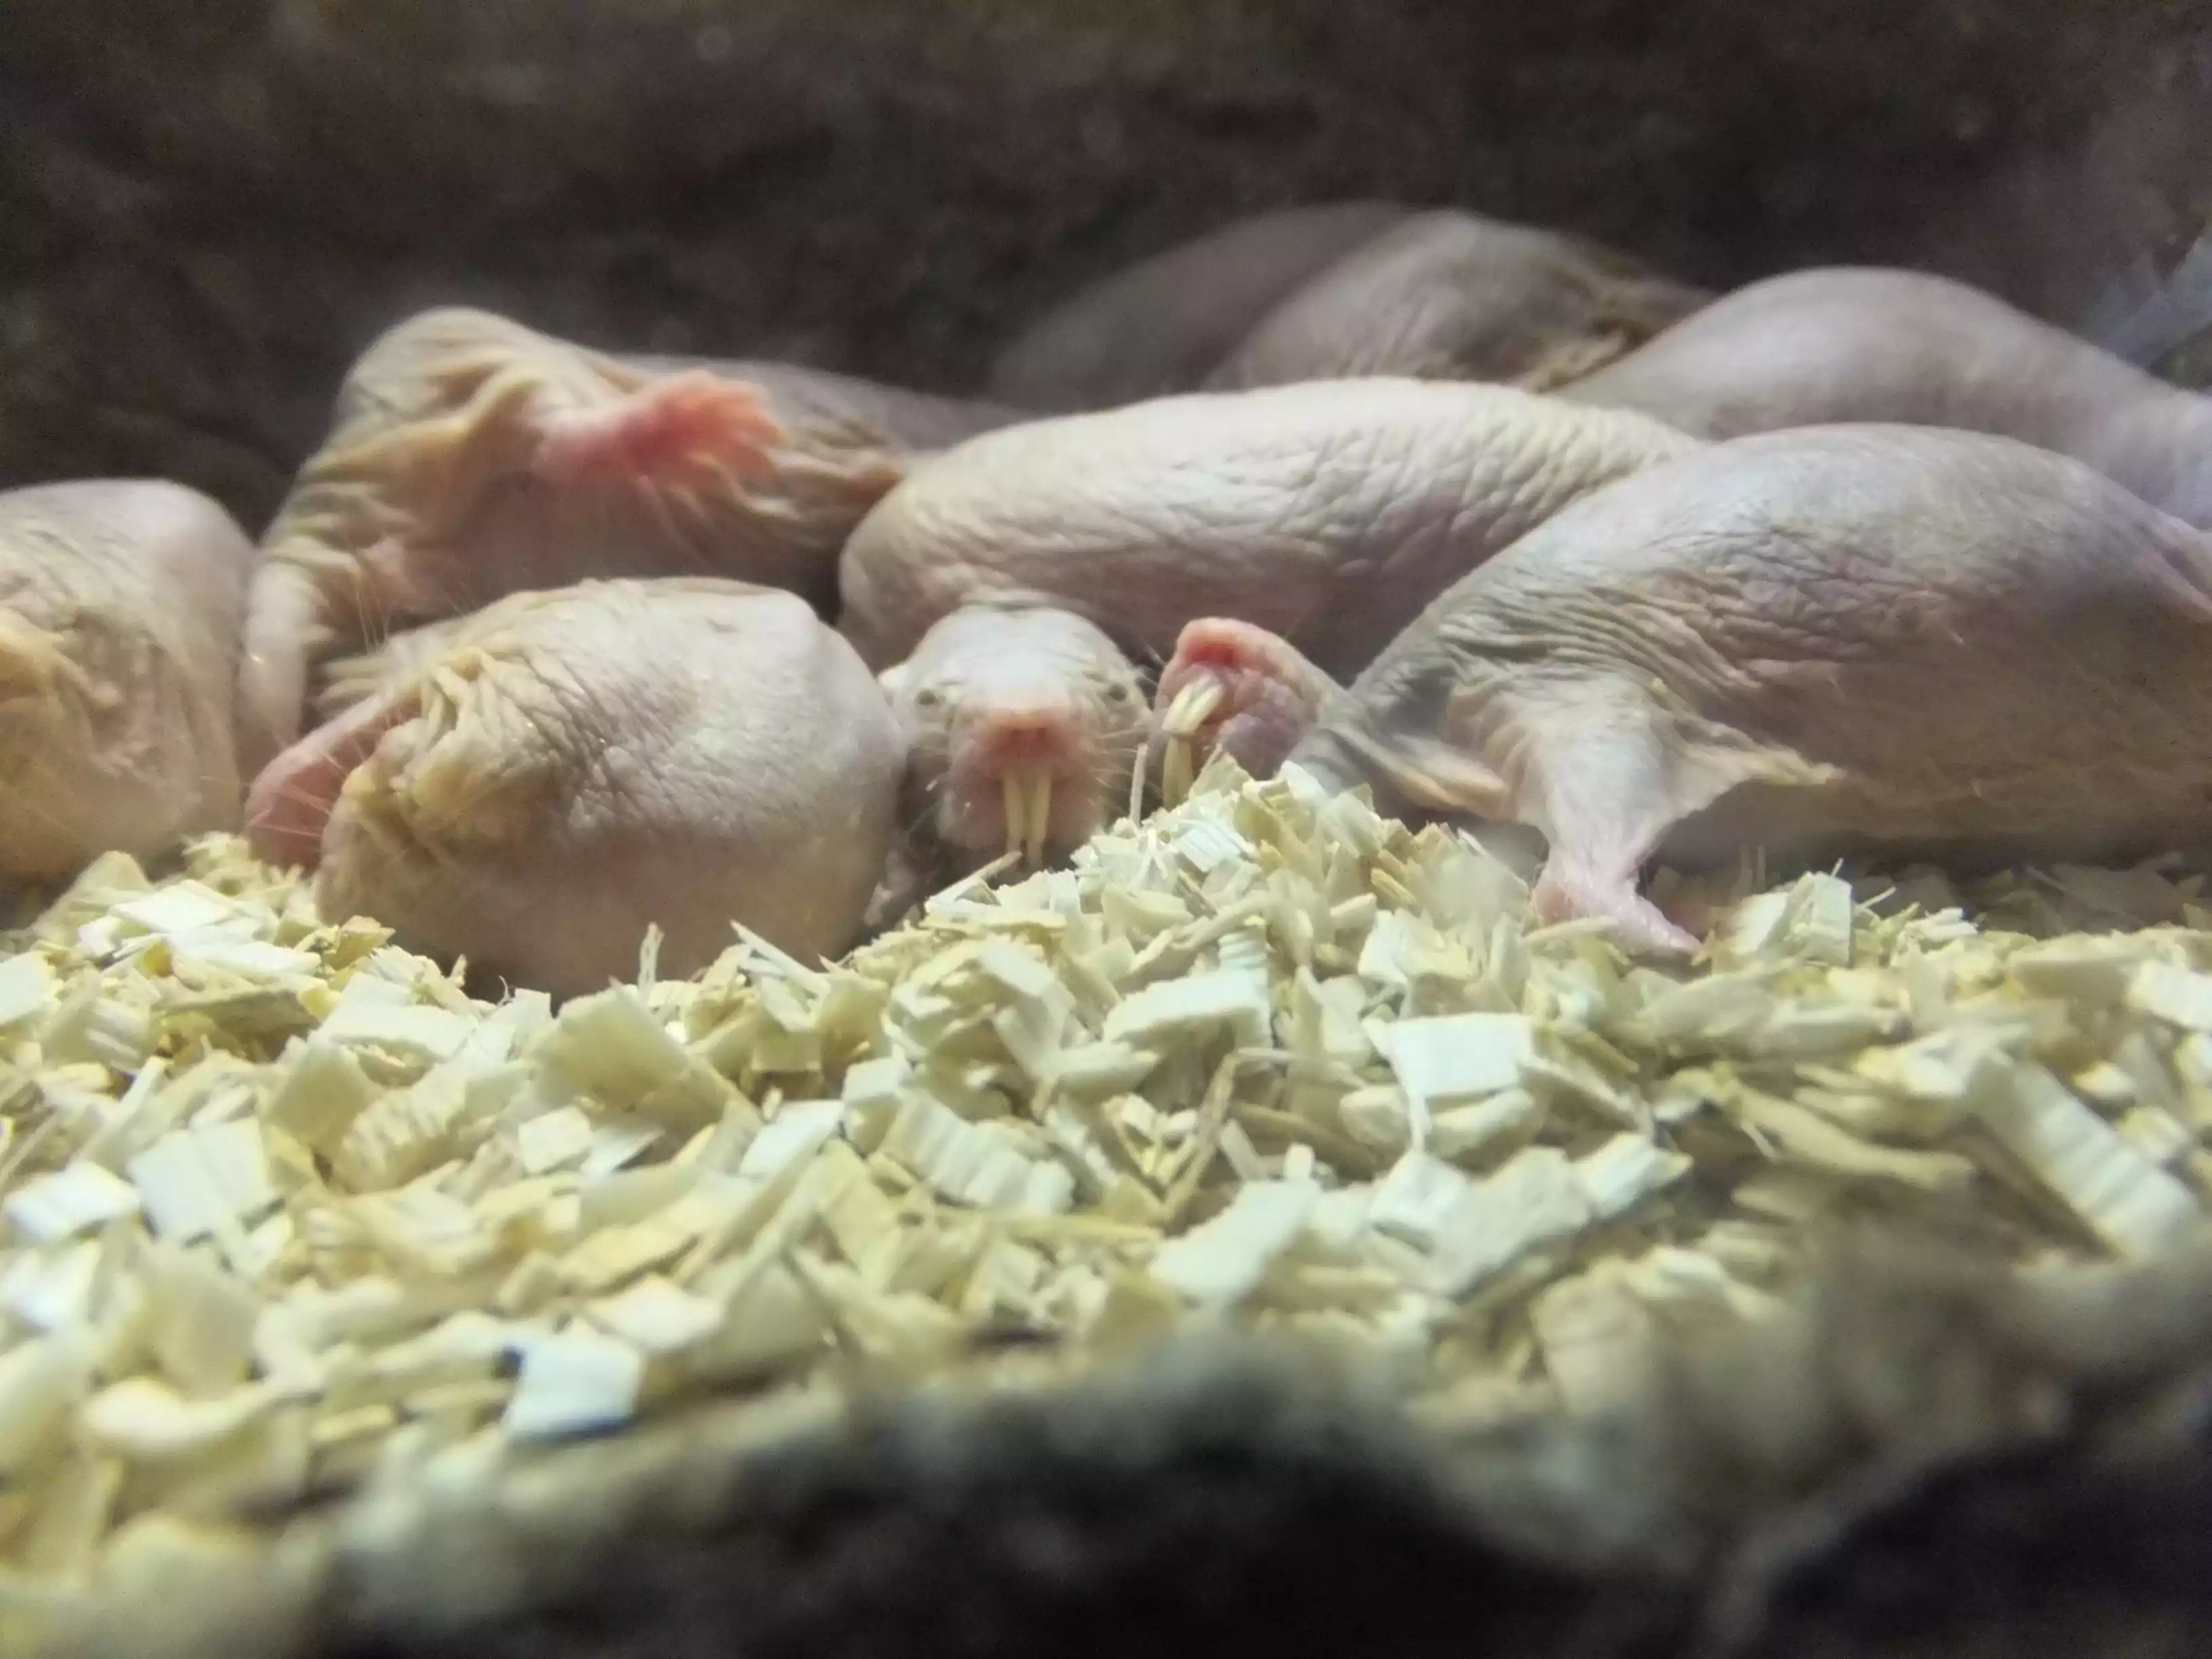 Naked mole rats sleeping together in their home.